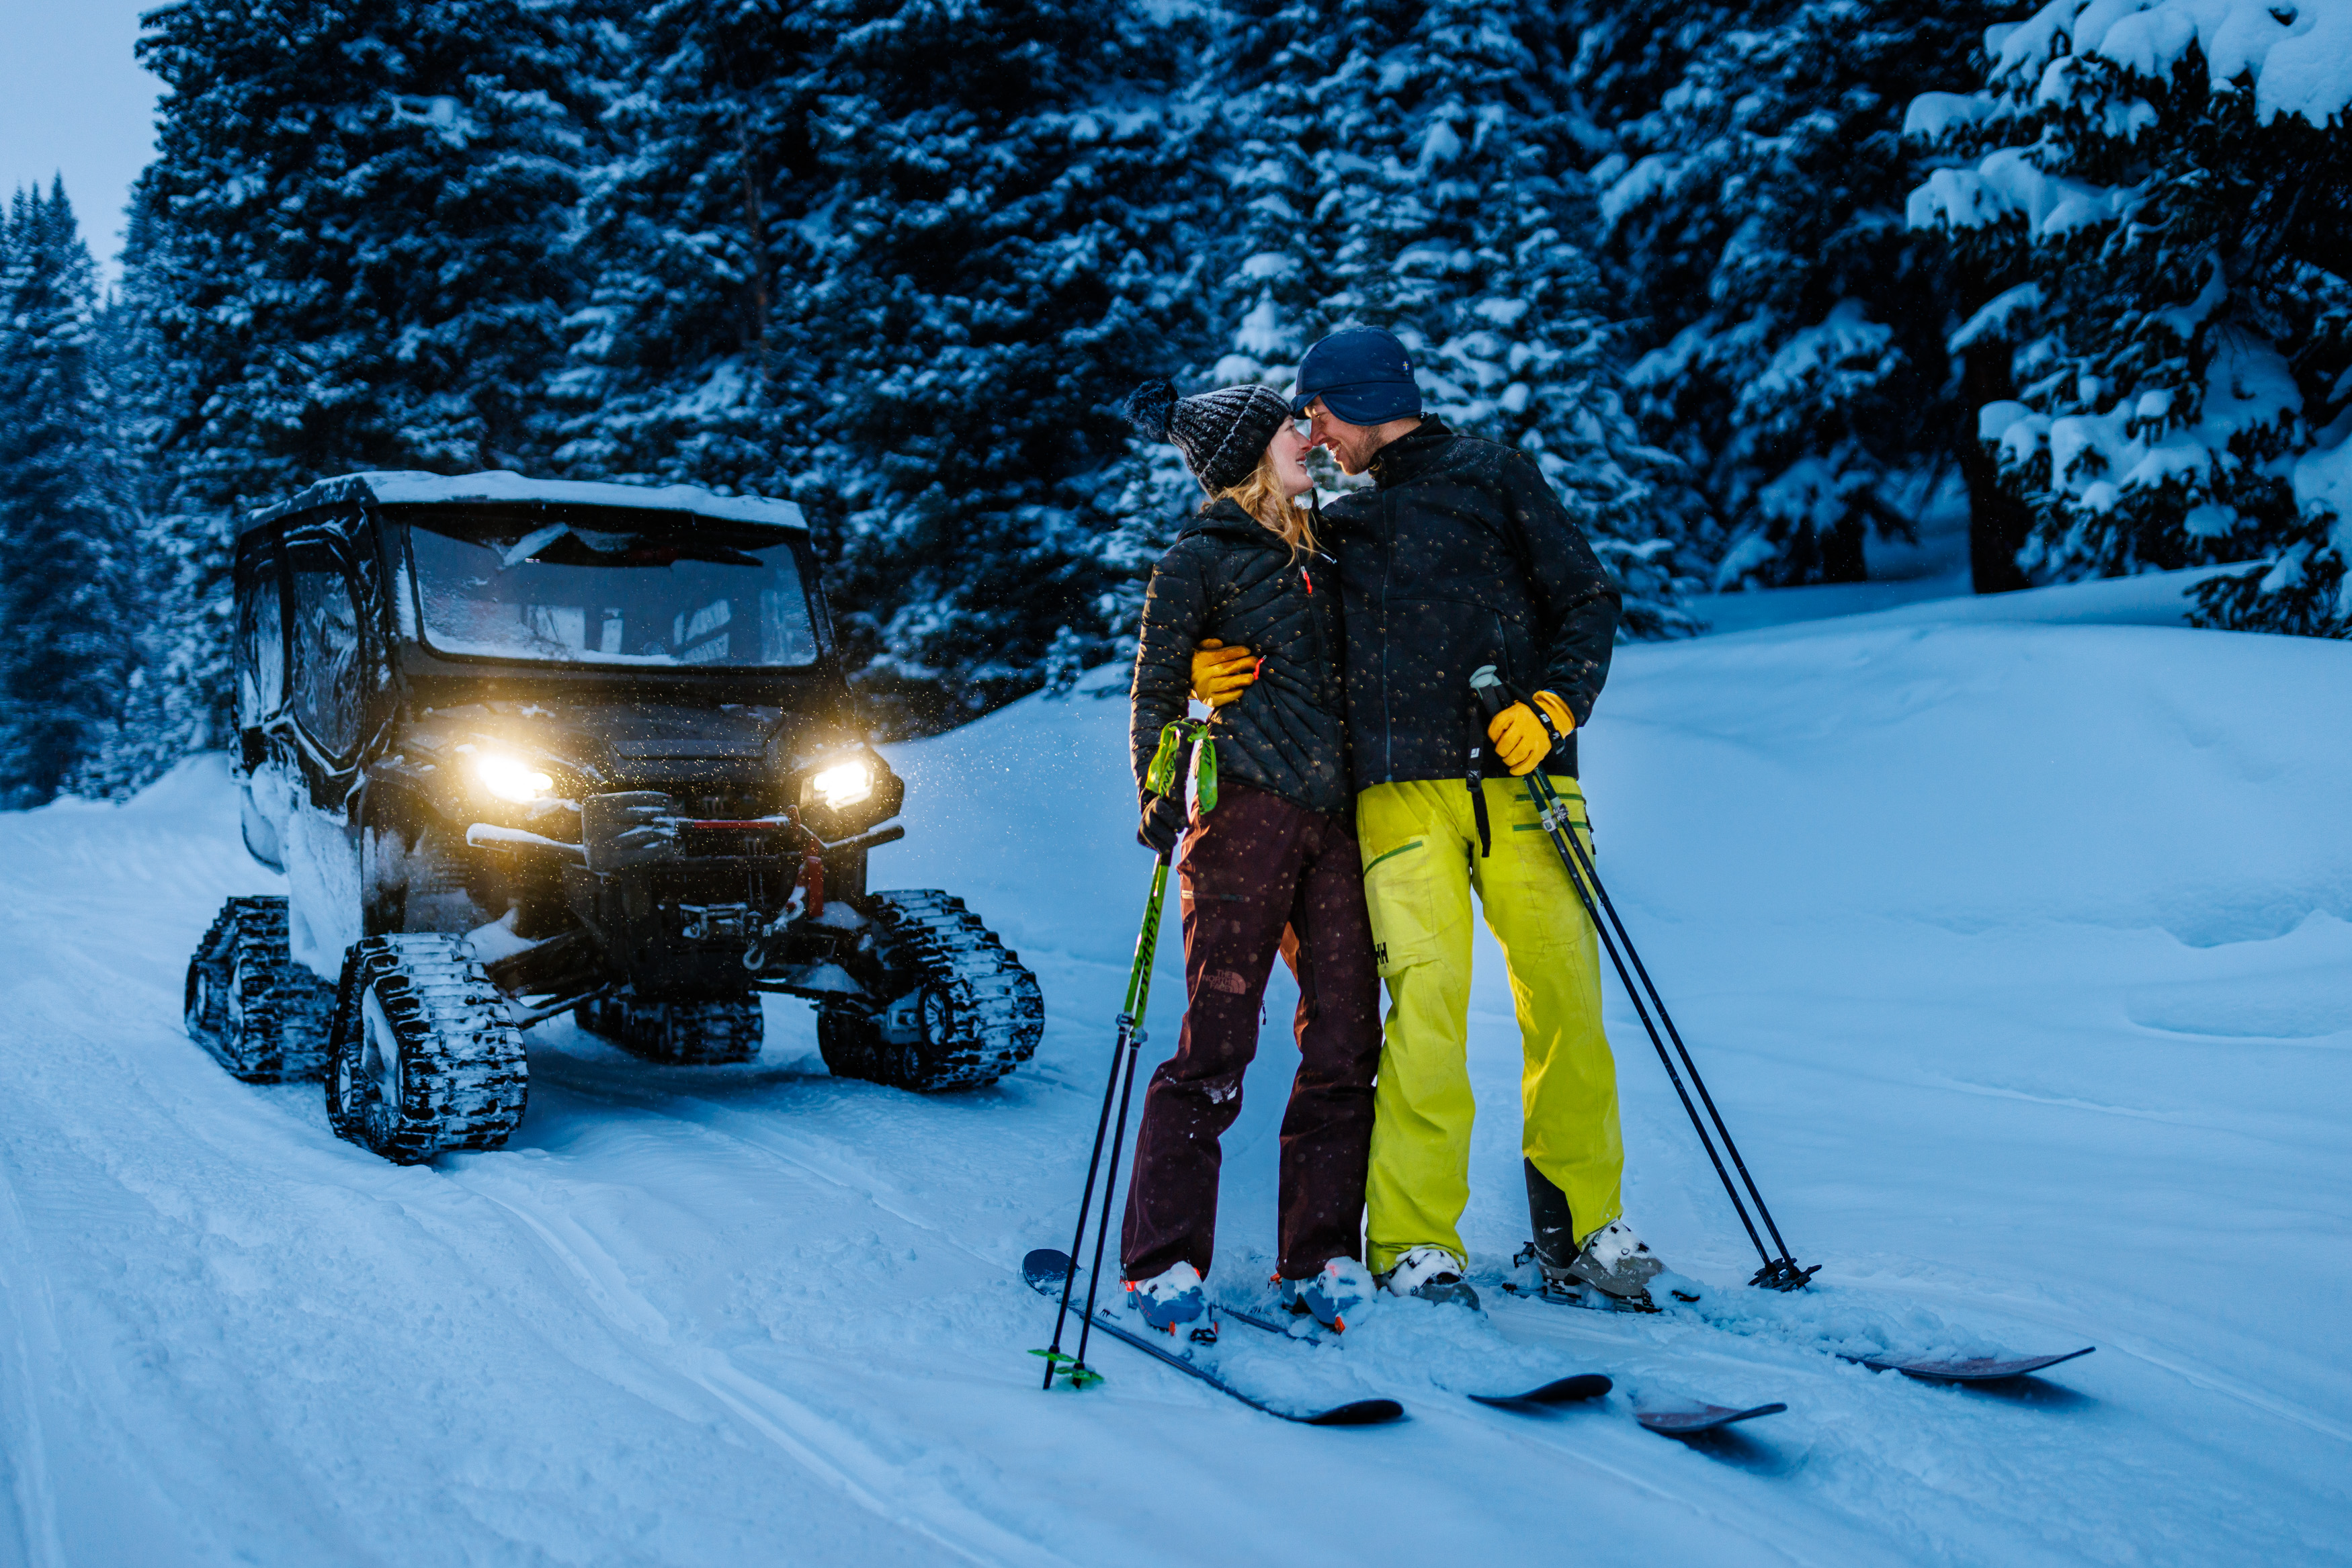 Our Camso tracked Honda Pioneer made for a great way to get around on Shrine Pass for this backcountry skiing session.